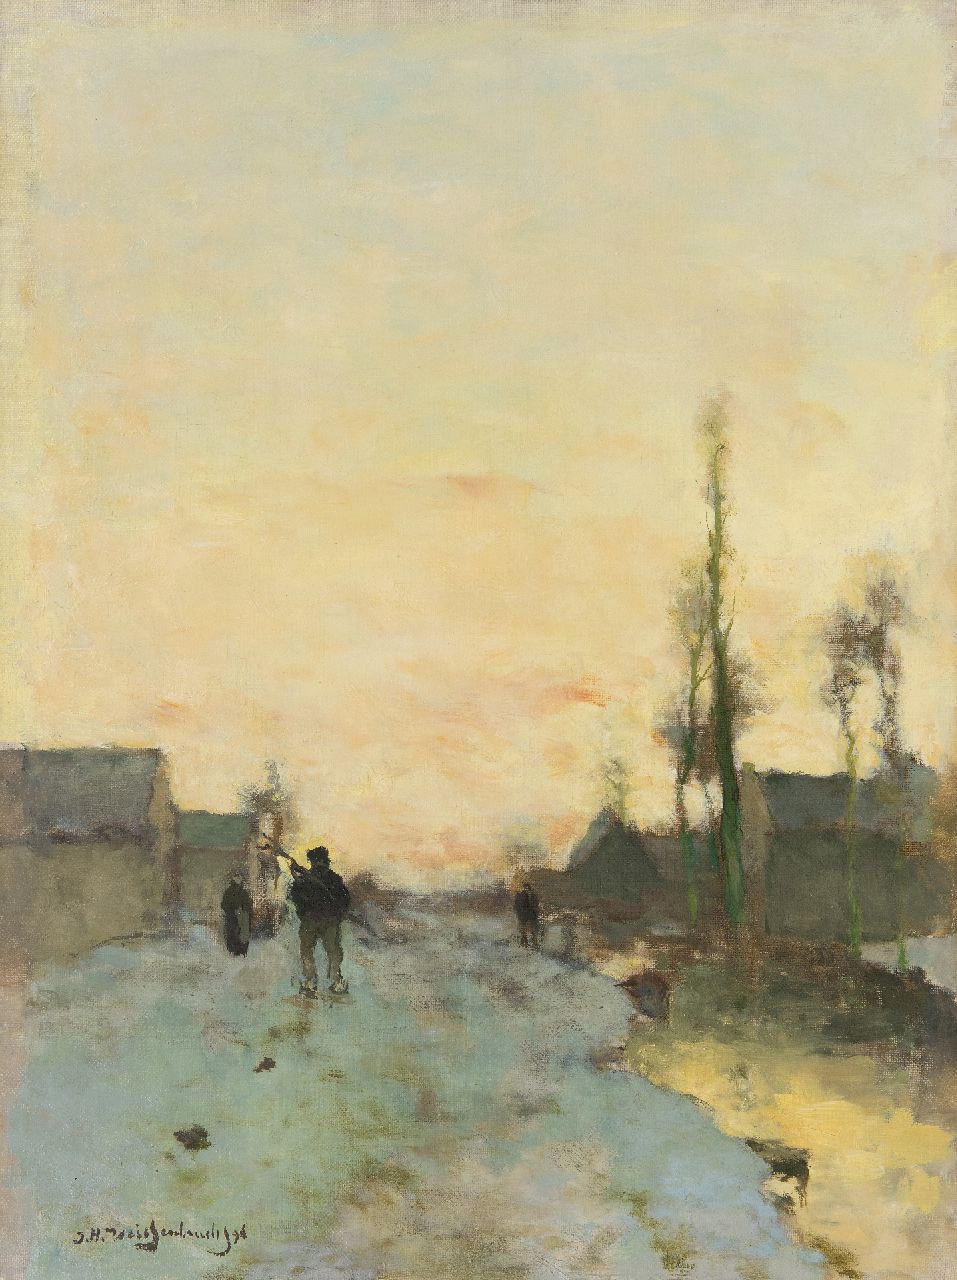 Weissenbruch H.J.  | Hendrik Johannes 'J.H.' Weissenbruch, Figures on a path near Noorden, oil on canvas 55.6 x 41.5 cm, signed l.l. and dated '94